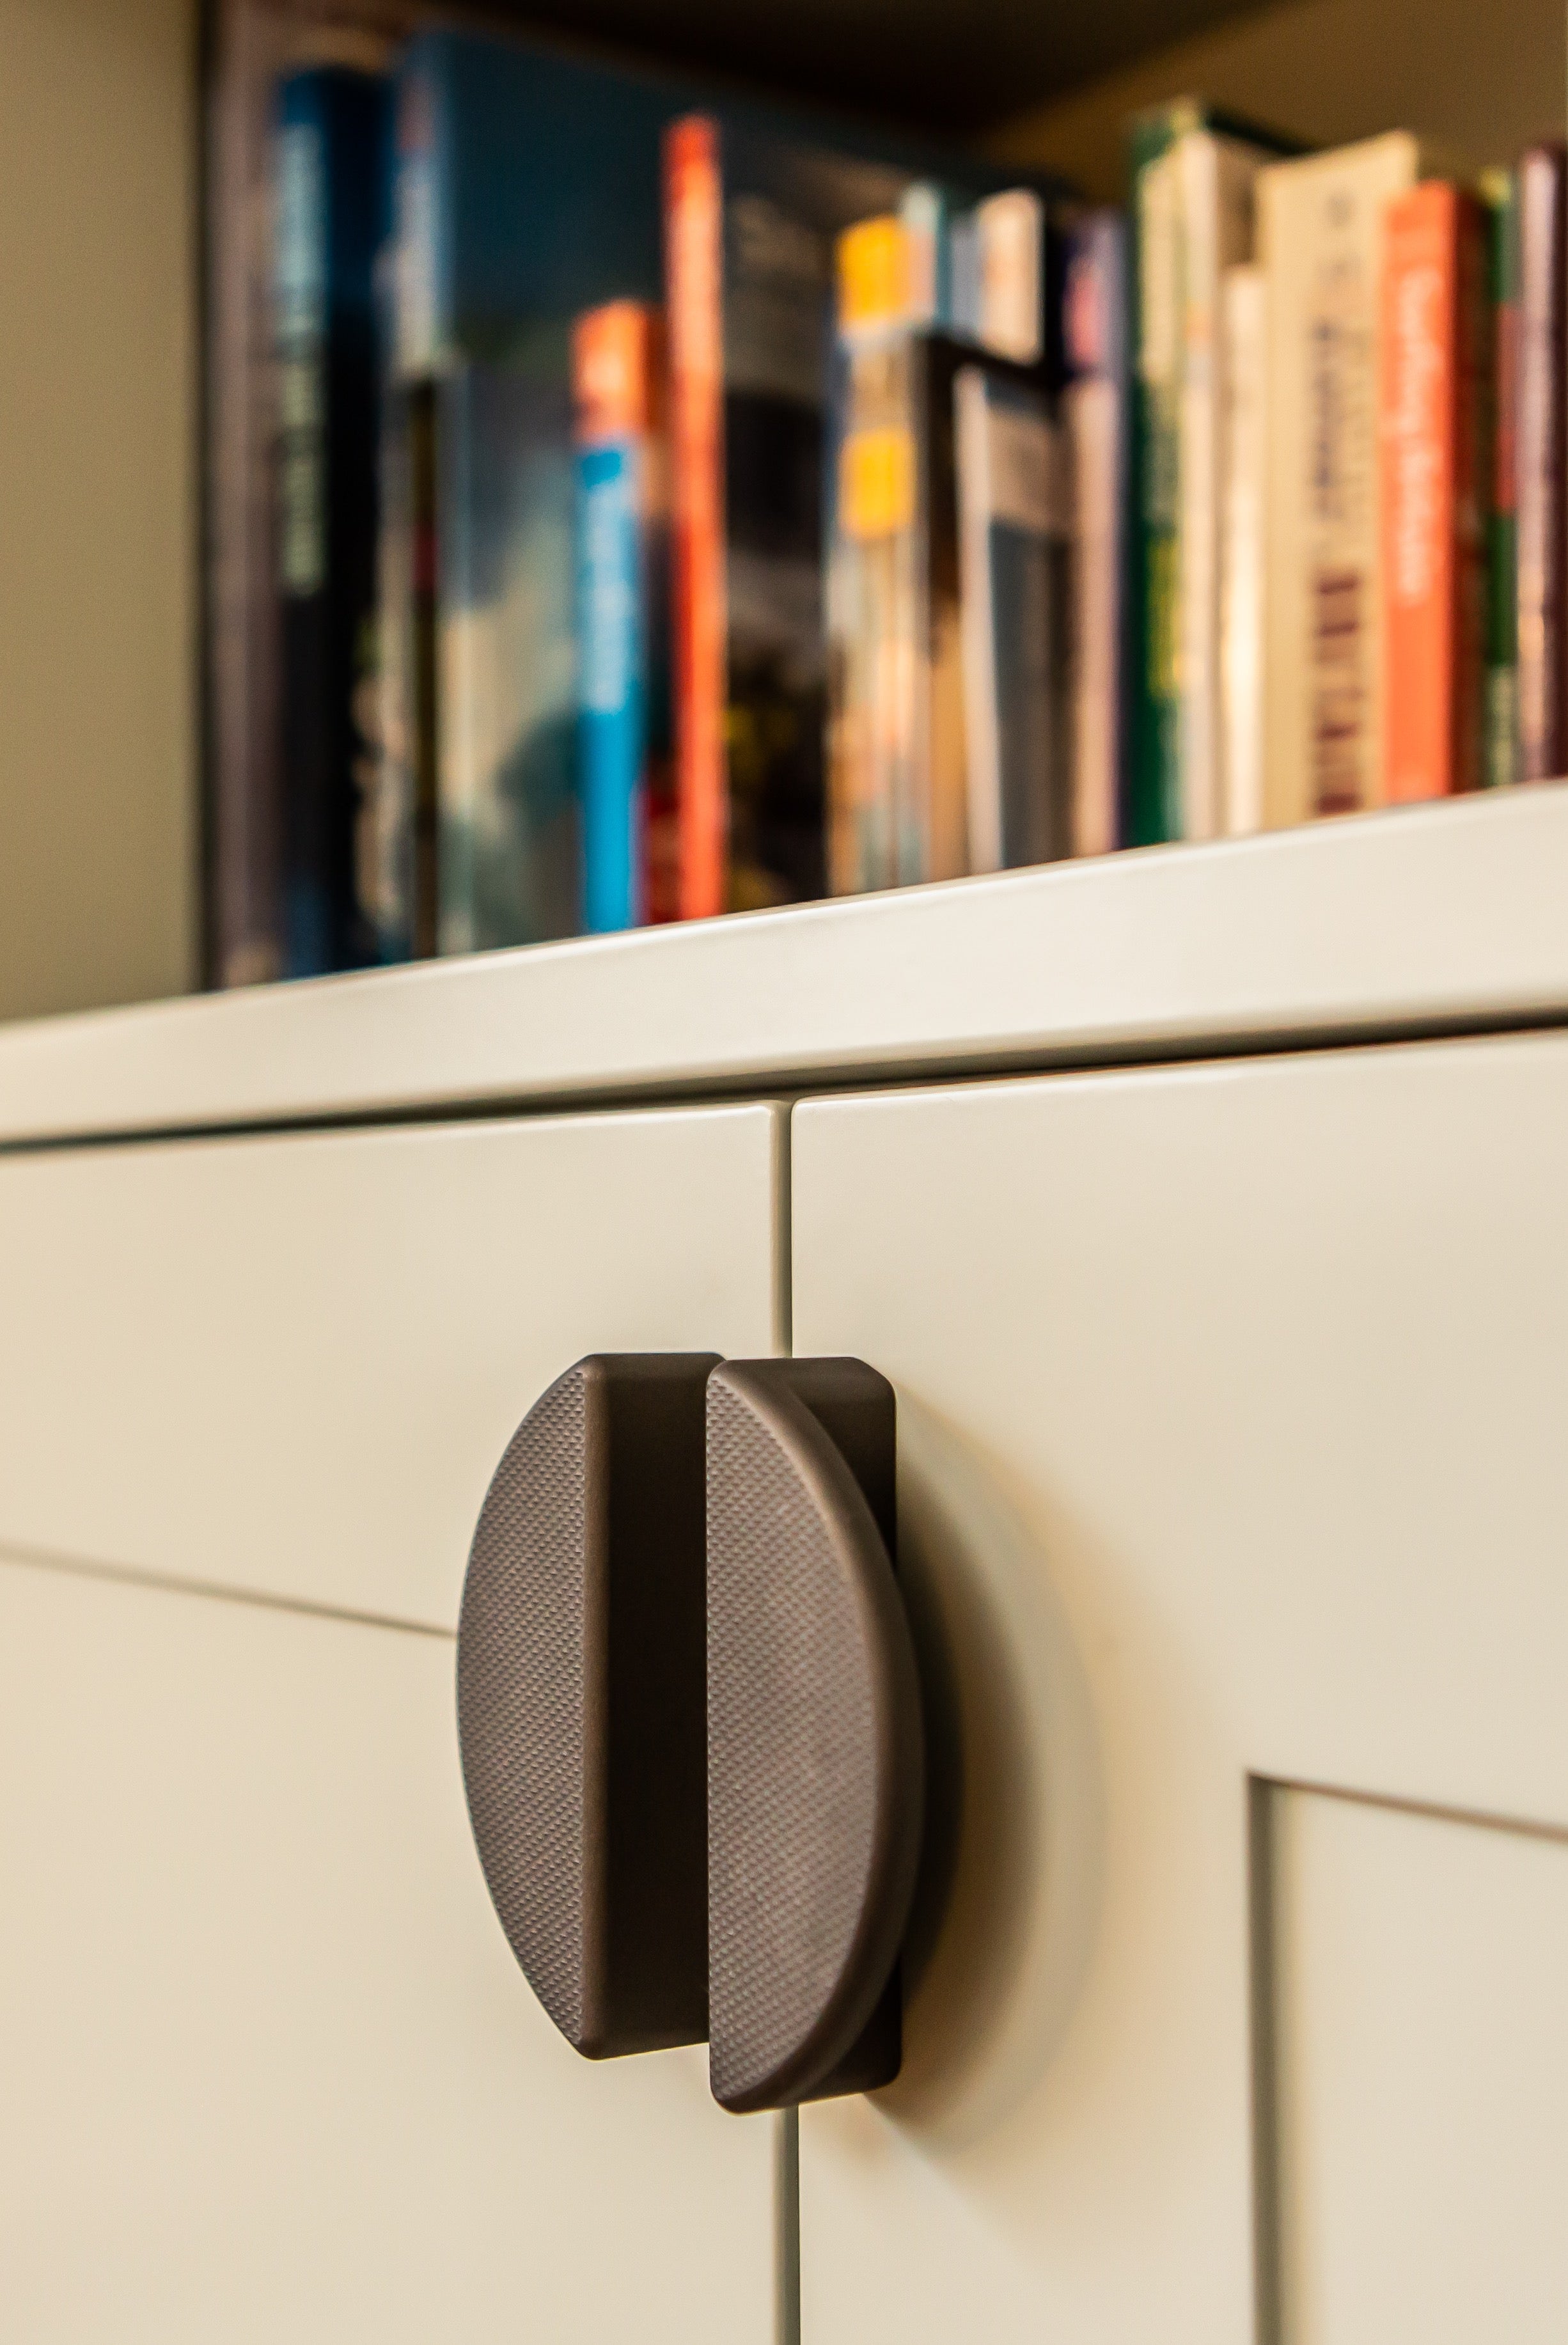 andy dunn photography / pete hill designs carpentry and joinery. cranbrook crescent pull handle in ceramic tungsten 